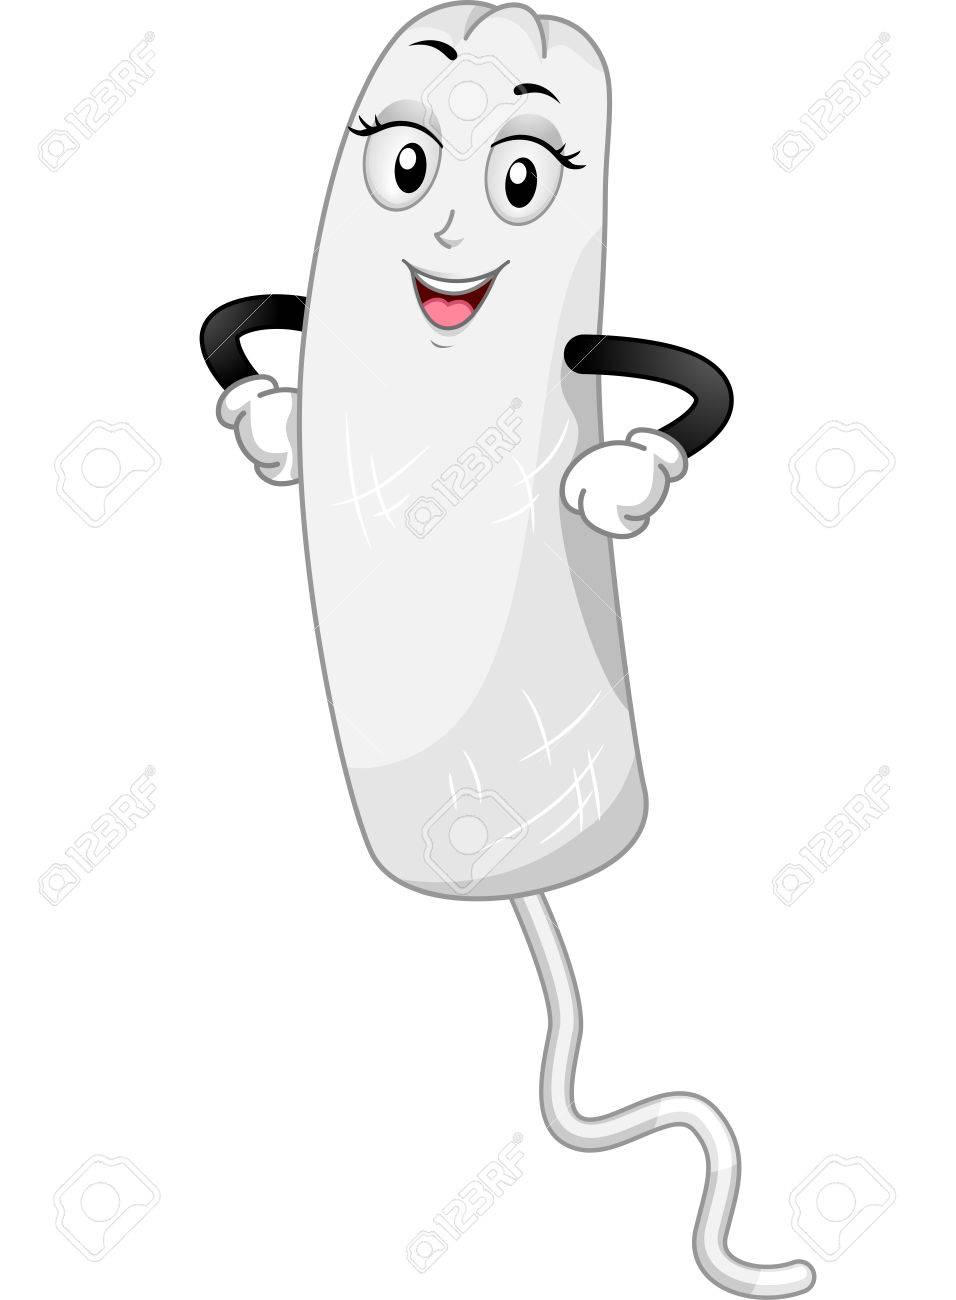 43636422-mascot-illustration-of-a-tampon-with-its-hands-on-its-waist.jpg